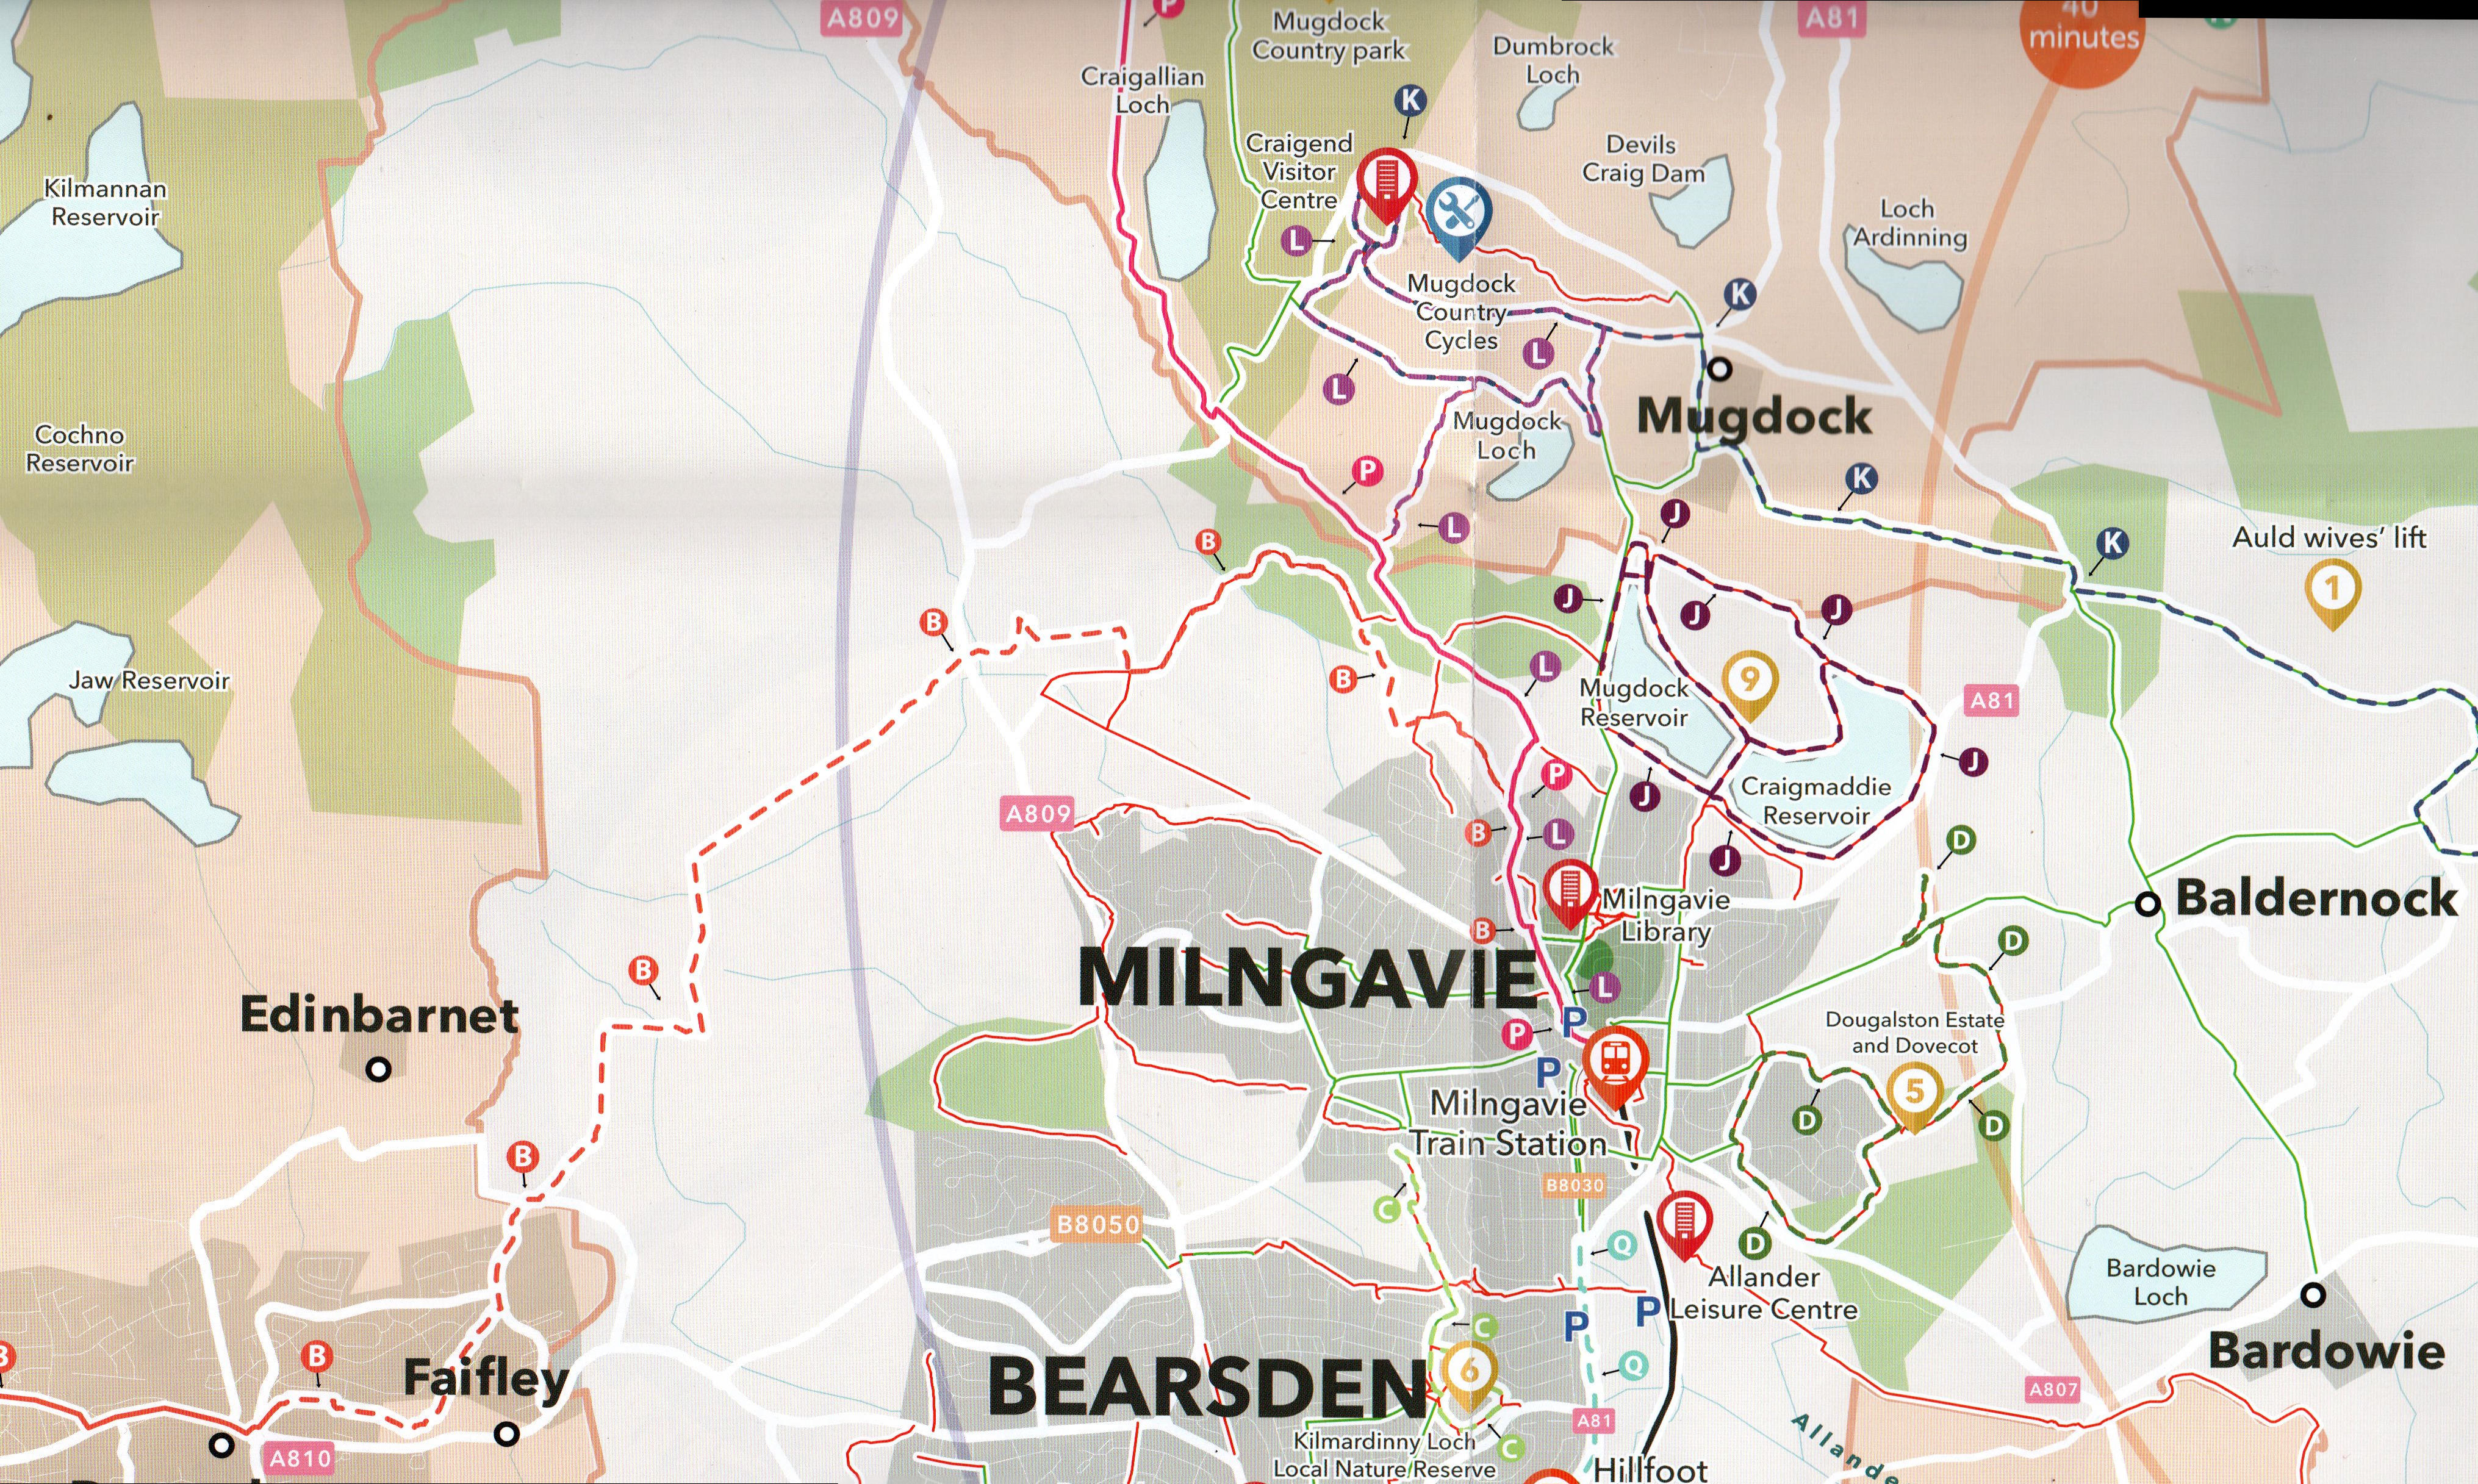 Map of Lochs and Reservoirs in Bearsden and Milngavie